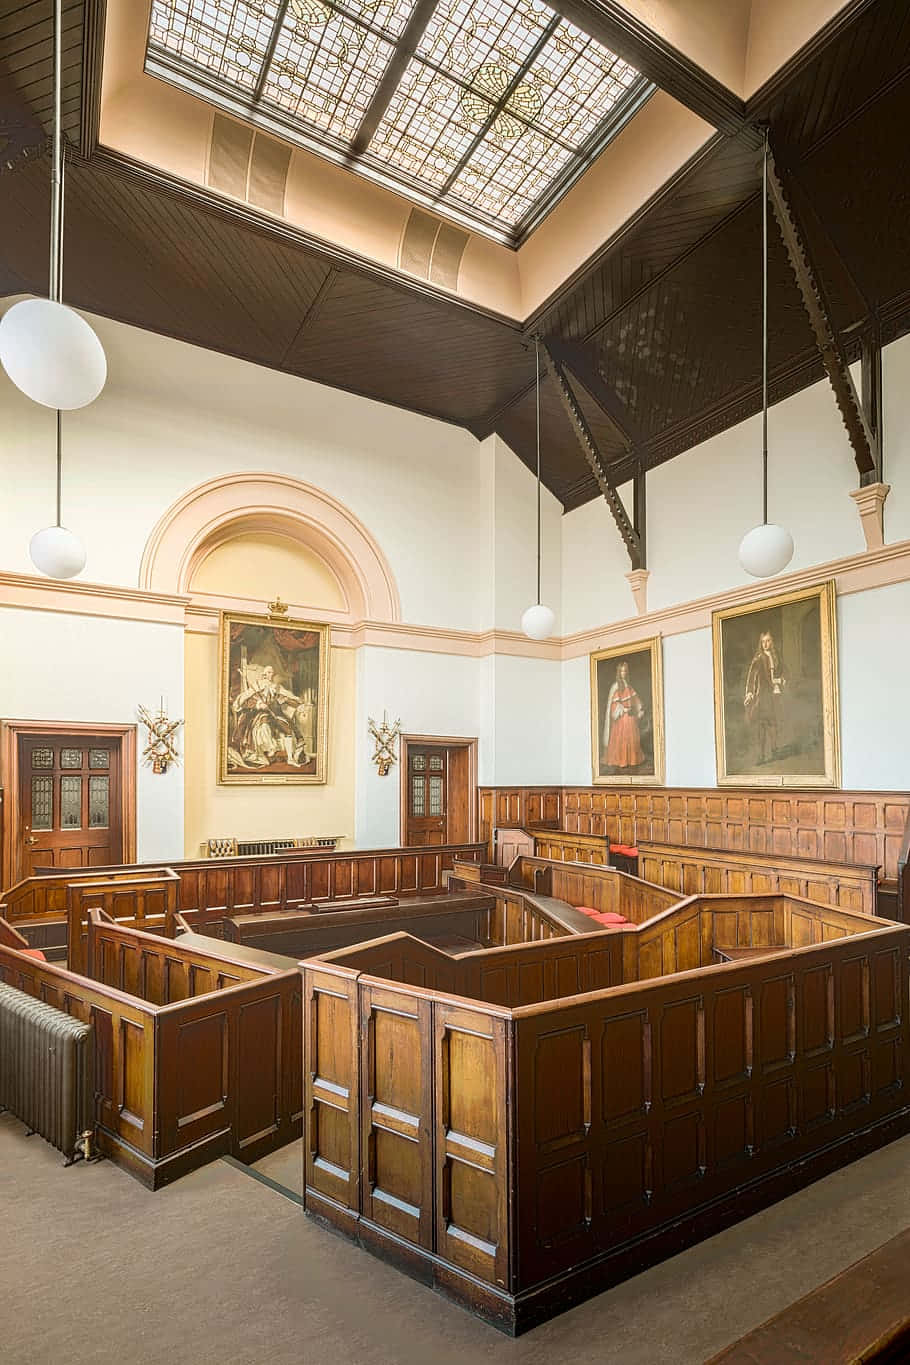 A Large Courtroom With Wooden Benches